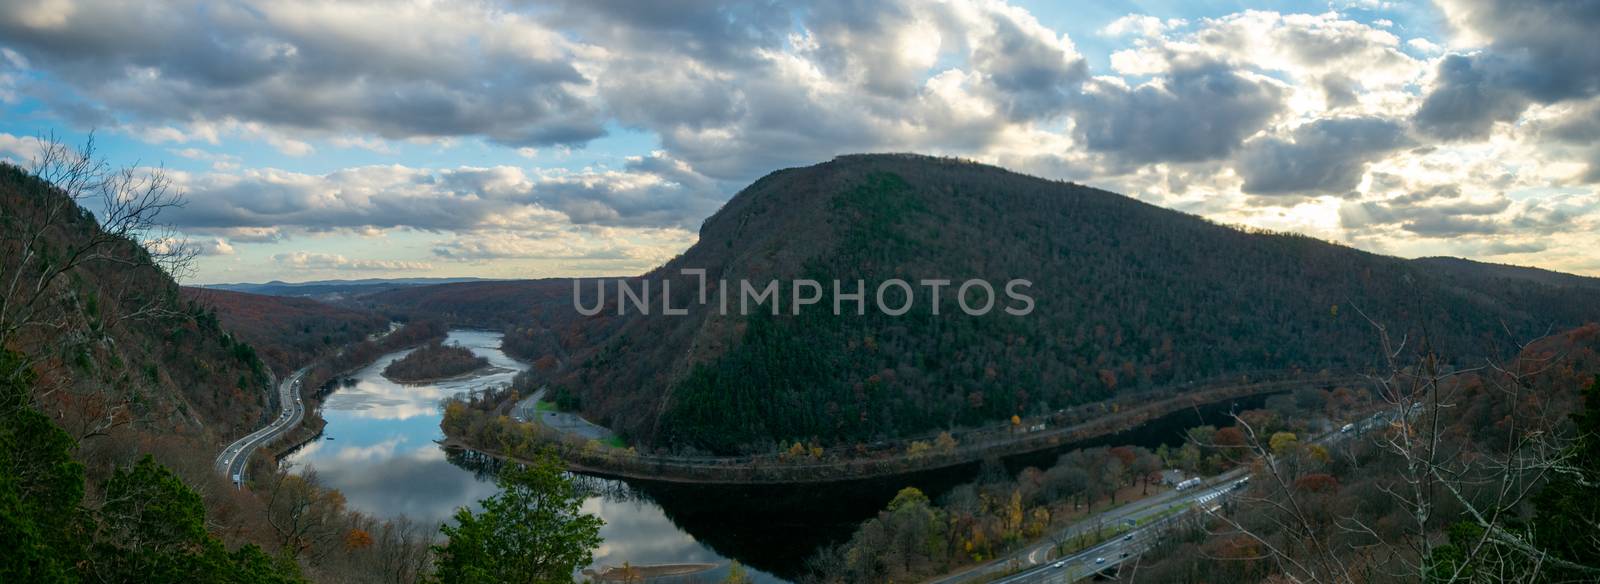 A Panoramic Shot of the View From Mount Tammany at the Delaware  by bju12290